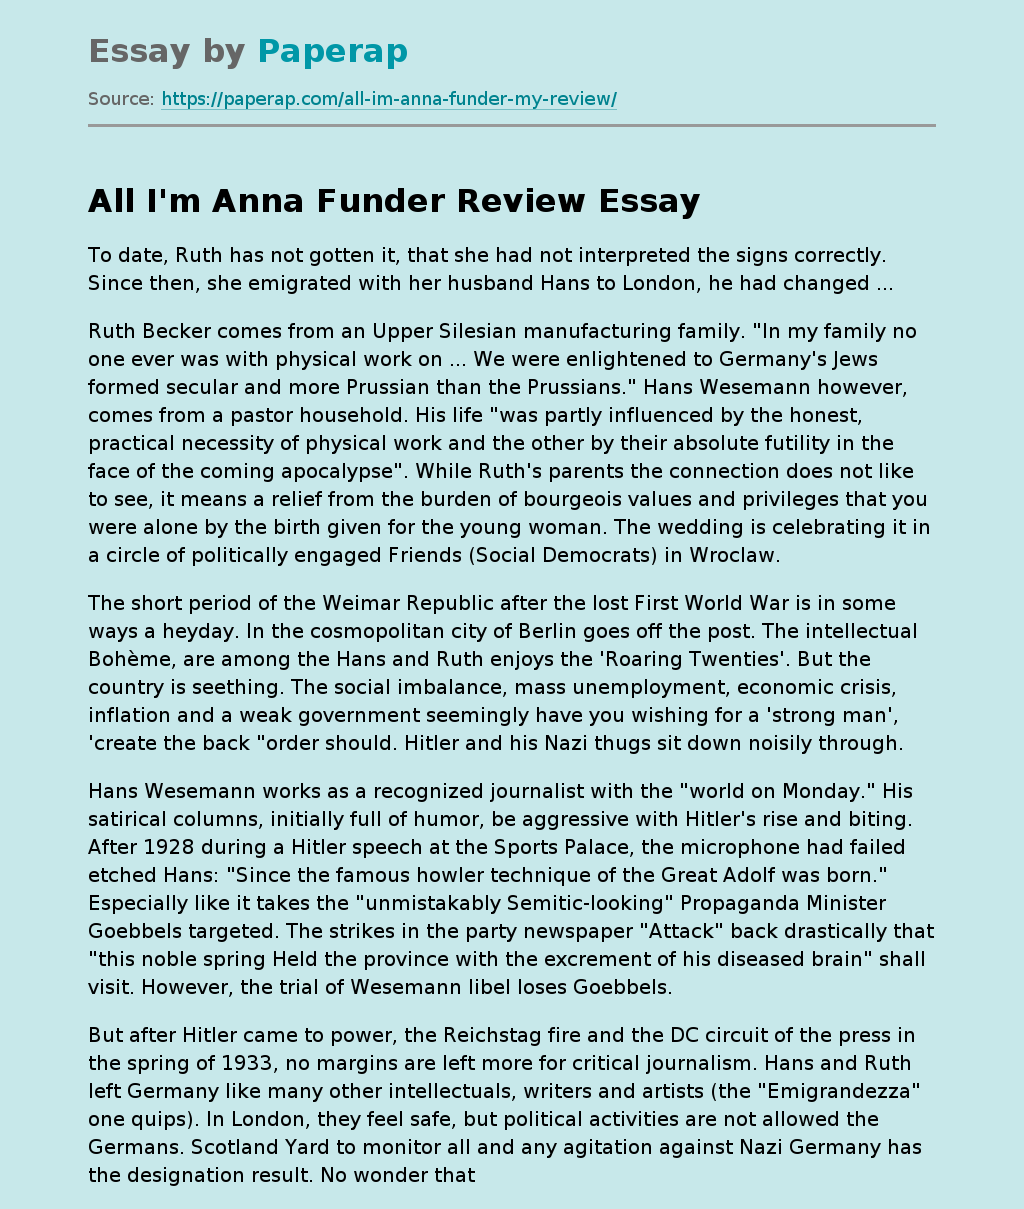 All I'm Anna Funder Review